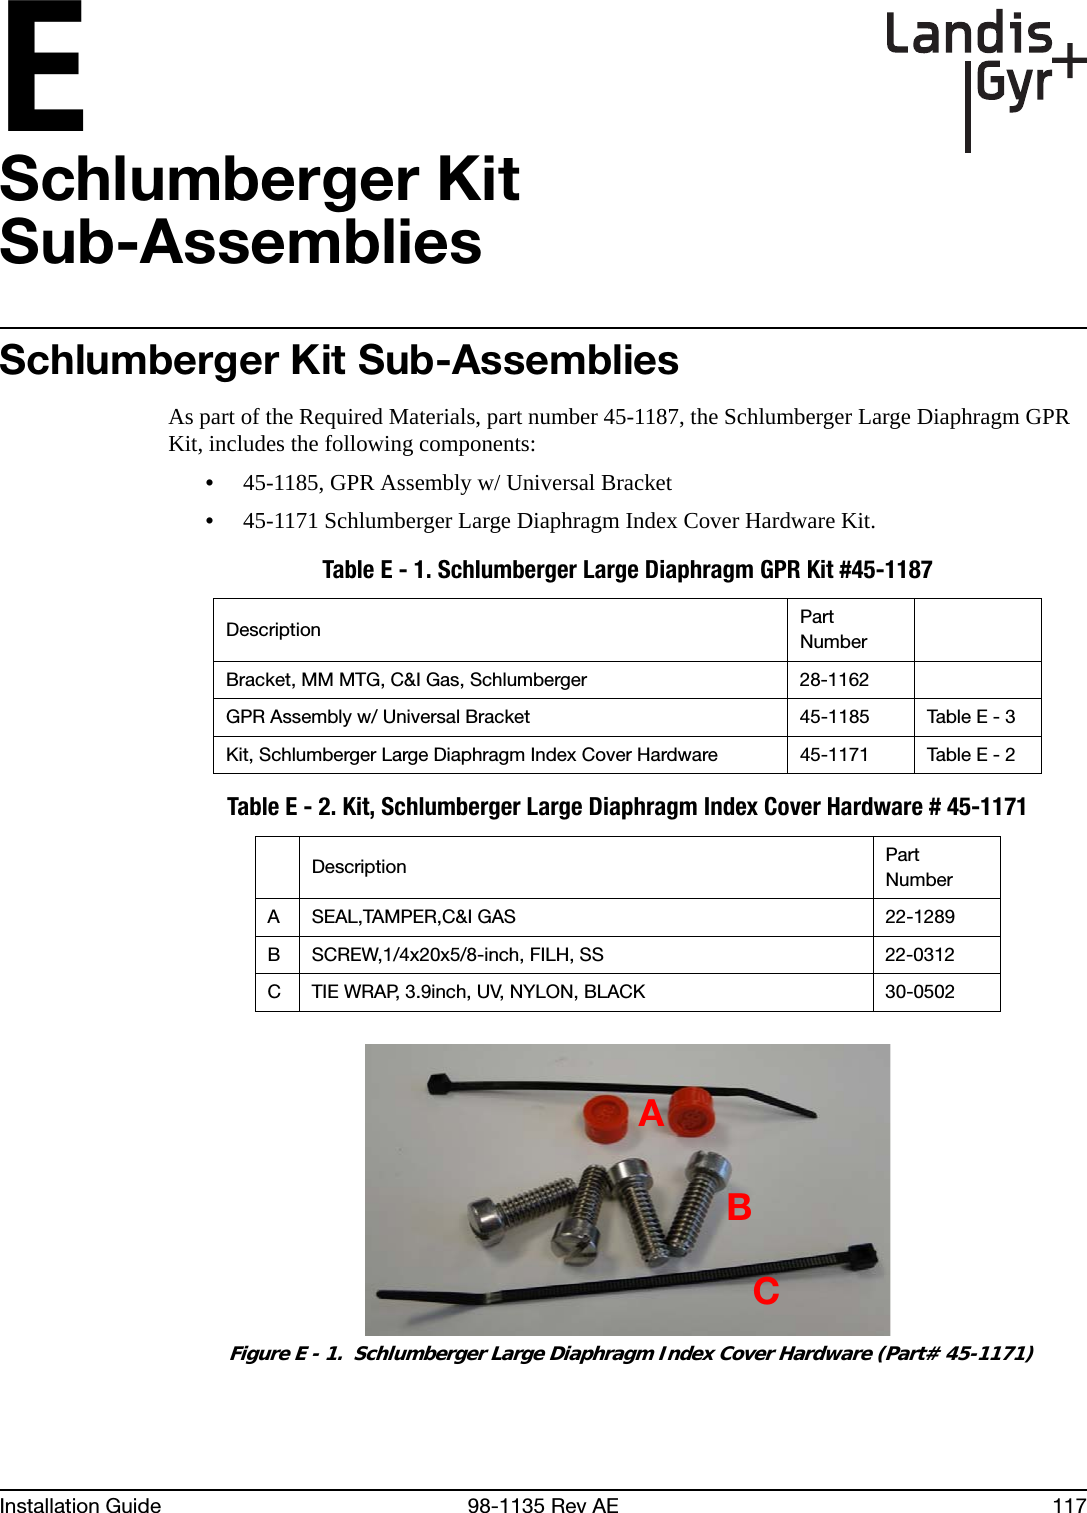 EInstallation Guide 98-1135 Rev AE 117Schlumberger KitSub-AssembliesSchlumberger Kit Sub-AssembliesAs part of the Required Materials, part number 45-1187, the Schlumberger Large Diaphragm GPR Kit, includes the following components:•45-1185, GPR Assembly w/ Universal Bracket•45-1171 Schlumberger Large Diaphragm Index Cover Hardware Kit. Figure E - 1.  Schlumberger Large Diaphragm Index Cover Hardware (Part# 45-1171)Table E - 1. Schlumberger Large Diaphragm GPR Kit #45-1187Description Part NumberBracket, MM MTG, C&amp;I Gas, Schlumberger 28-1162GPR Assembly w/ Universal Bracket 45-1185 Table E - 3Kit, Schlumberger Large Diaphragm Index Cover Hardware 45-1171 Table E - 2Table E - 2. Kit, Schlumberger Large Diaphragm Index Cover Hardware # 45-1171Description Part NumberA SEAL,TAMPER,C&amp;I GAS 22-1289B SCREW,1/4x20x5/8-inch, FILH, SS 22-0312C TIE WRAP, 3.9inch, UV, NYLON, BLACK 30-0502ABC